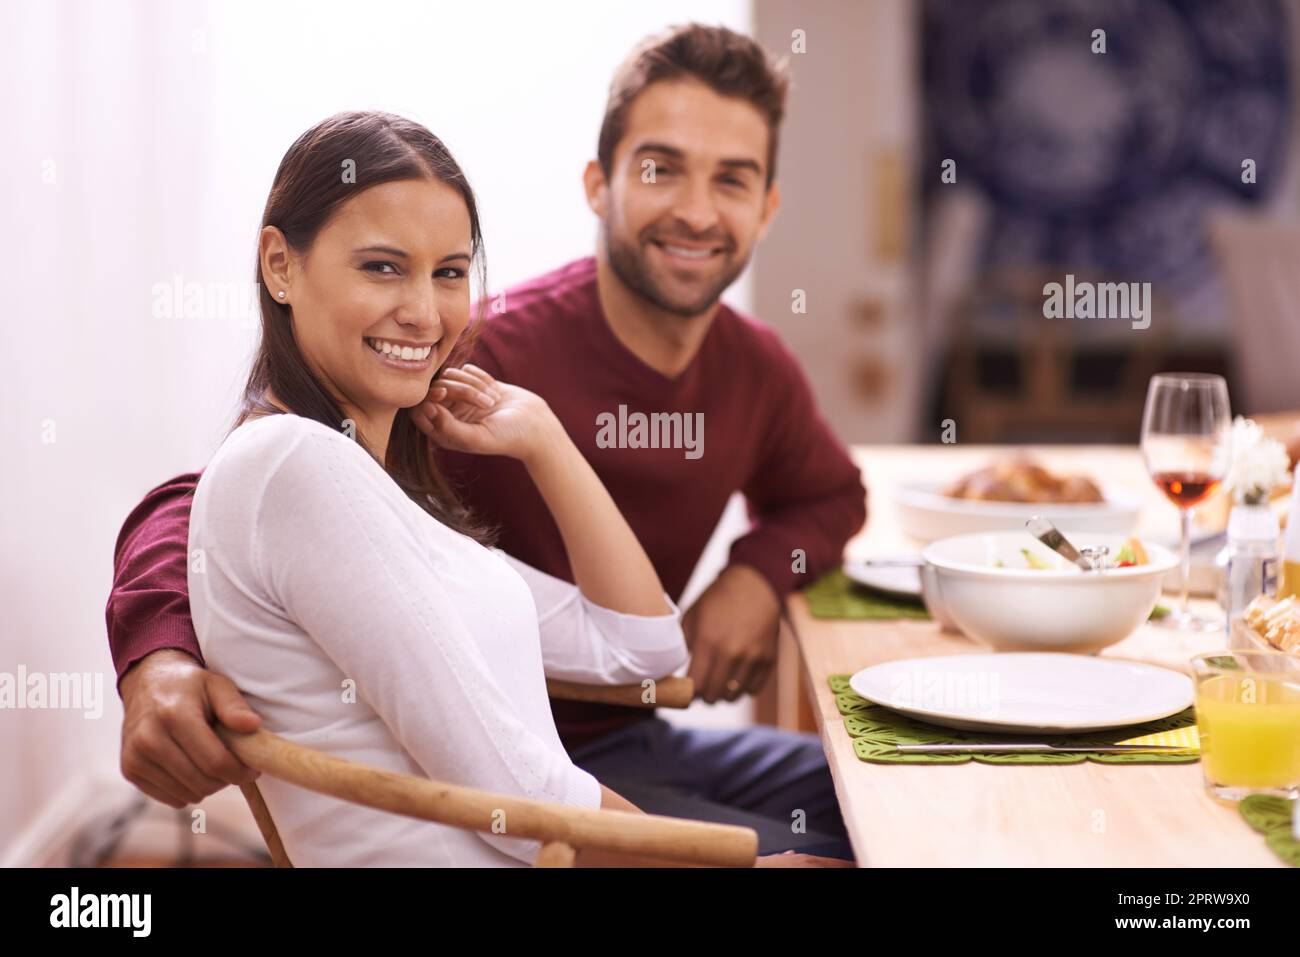 Food brings everyone together. A happy couple enjoying a family meal around the table. Stock Photo